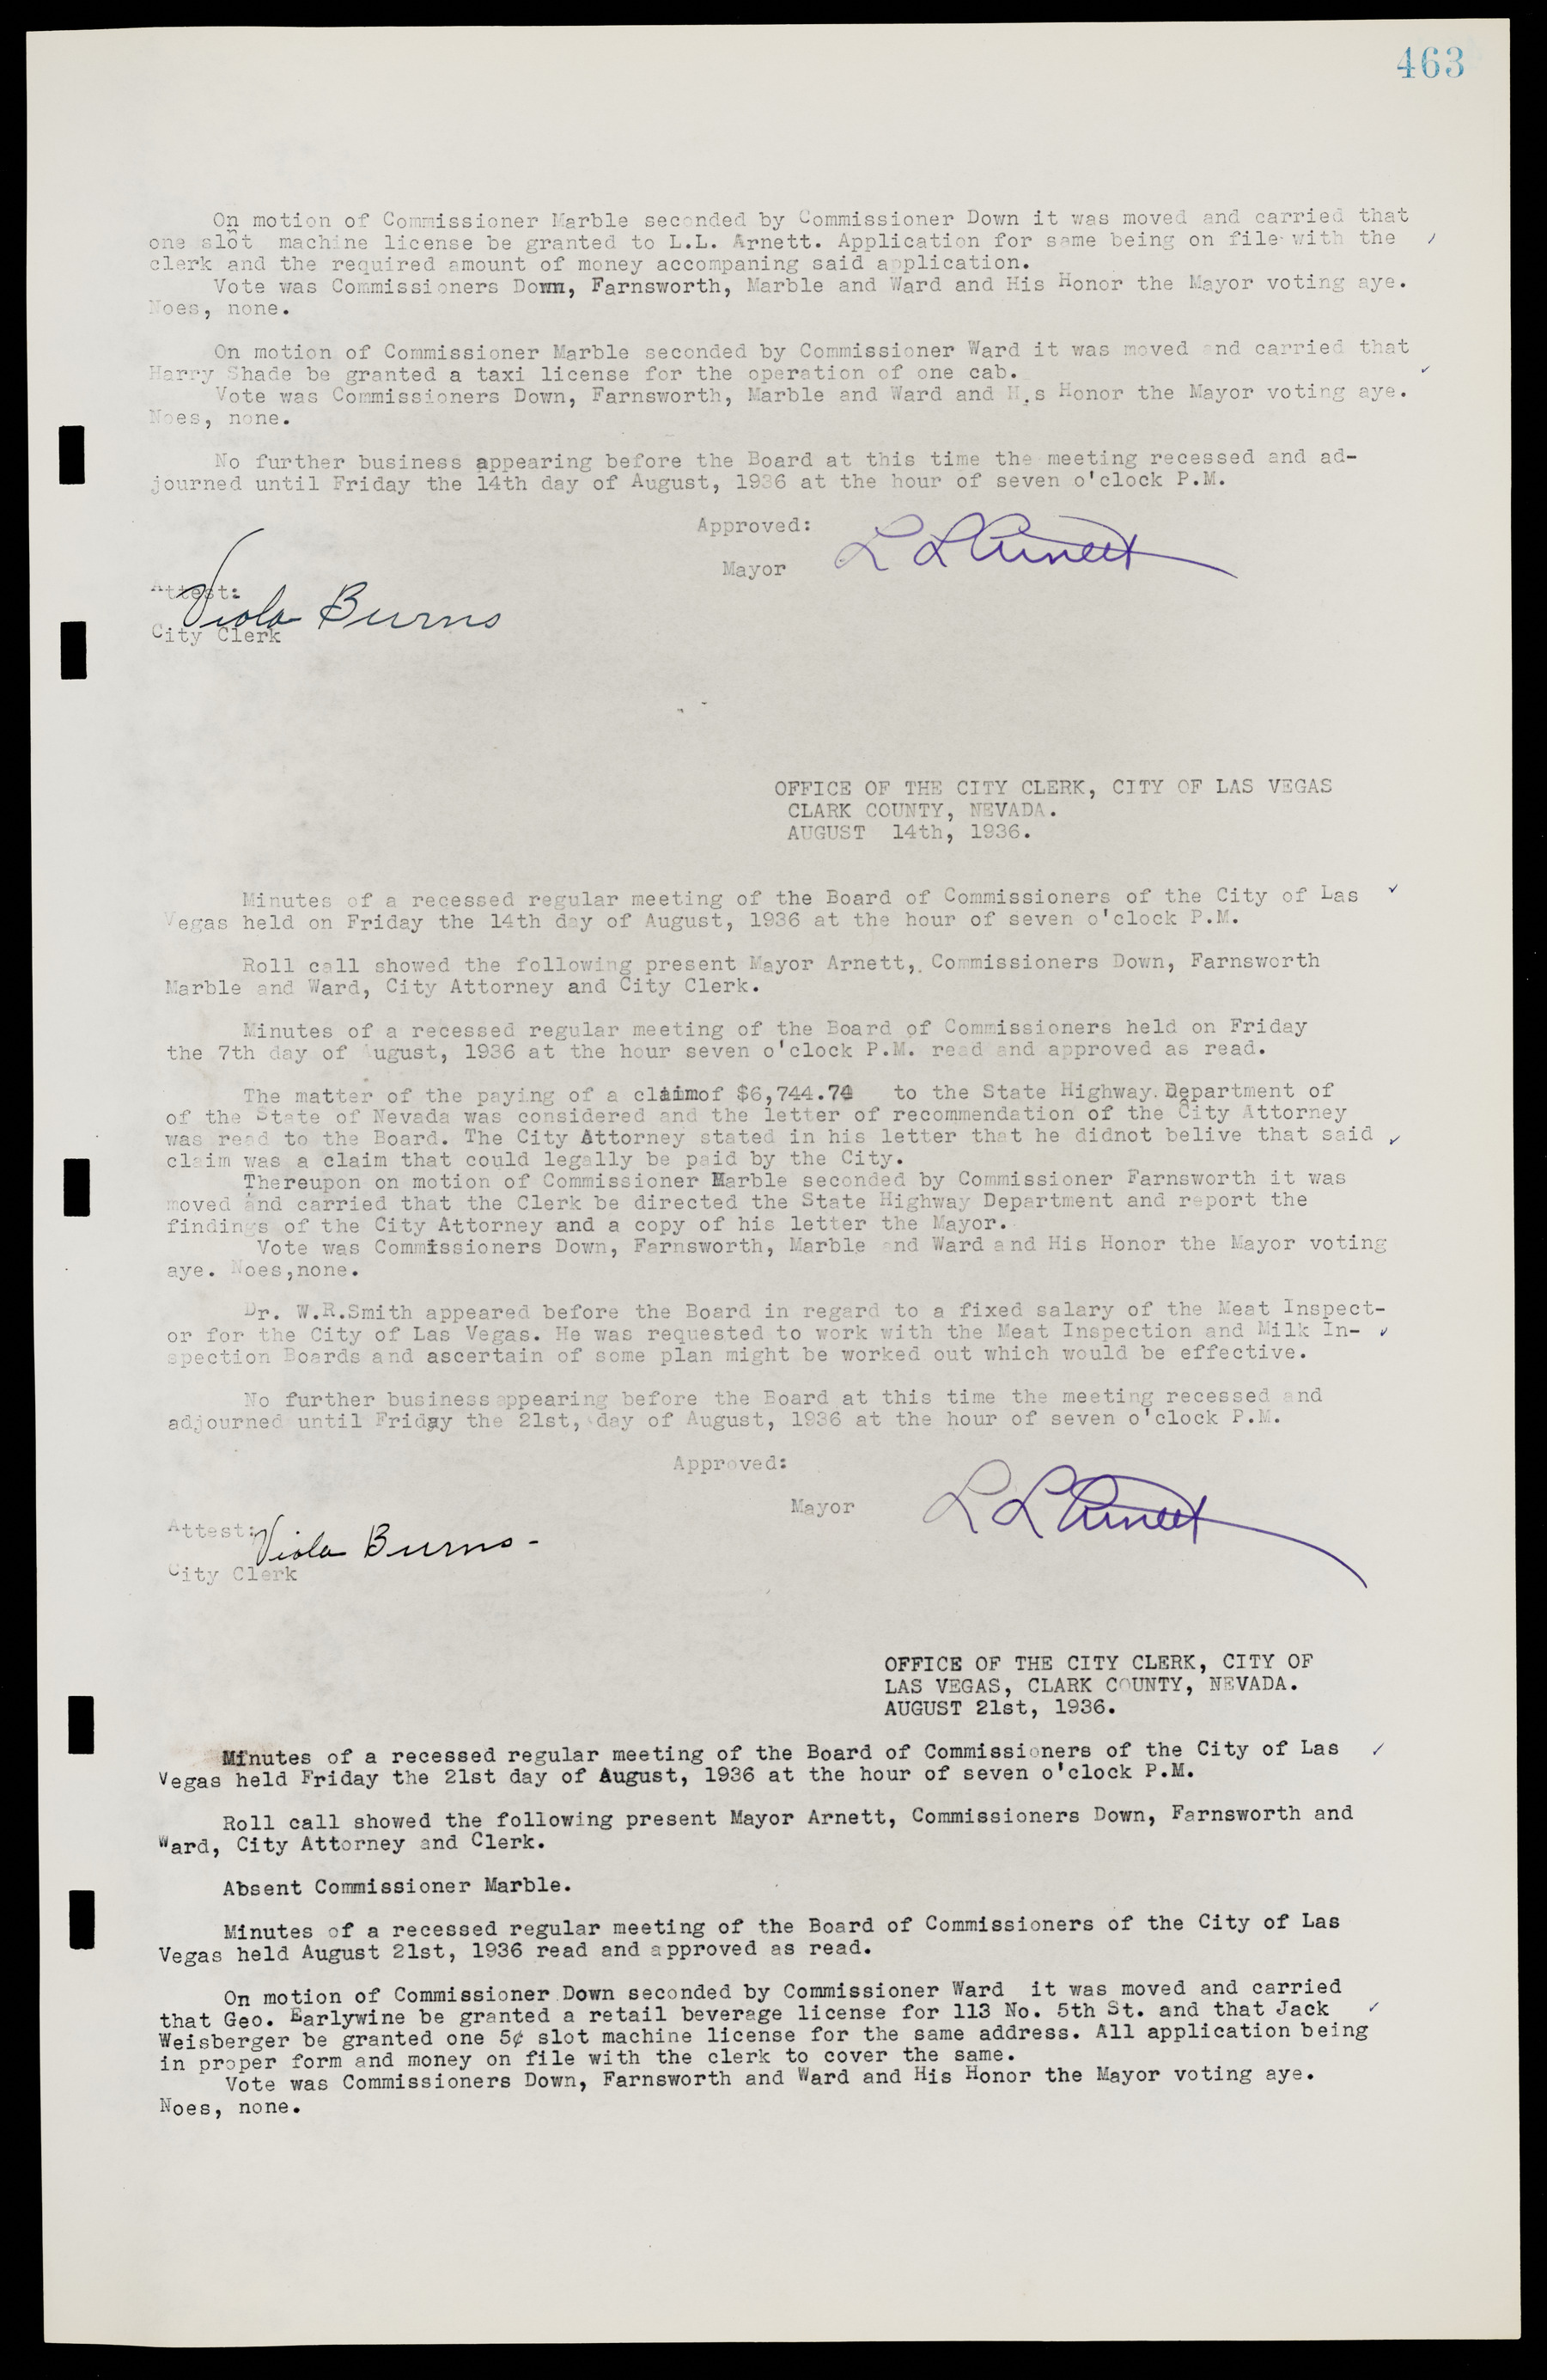 Las Vegas City Commission Minutes, May 14, 1929 to February 11, 1937, lvc000003-470